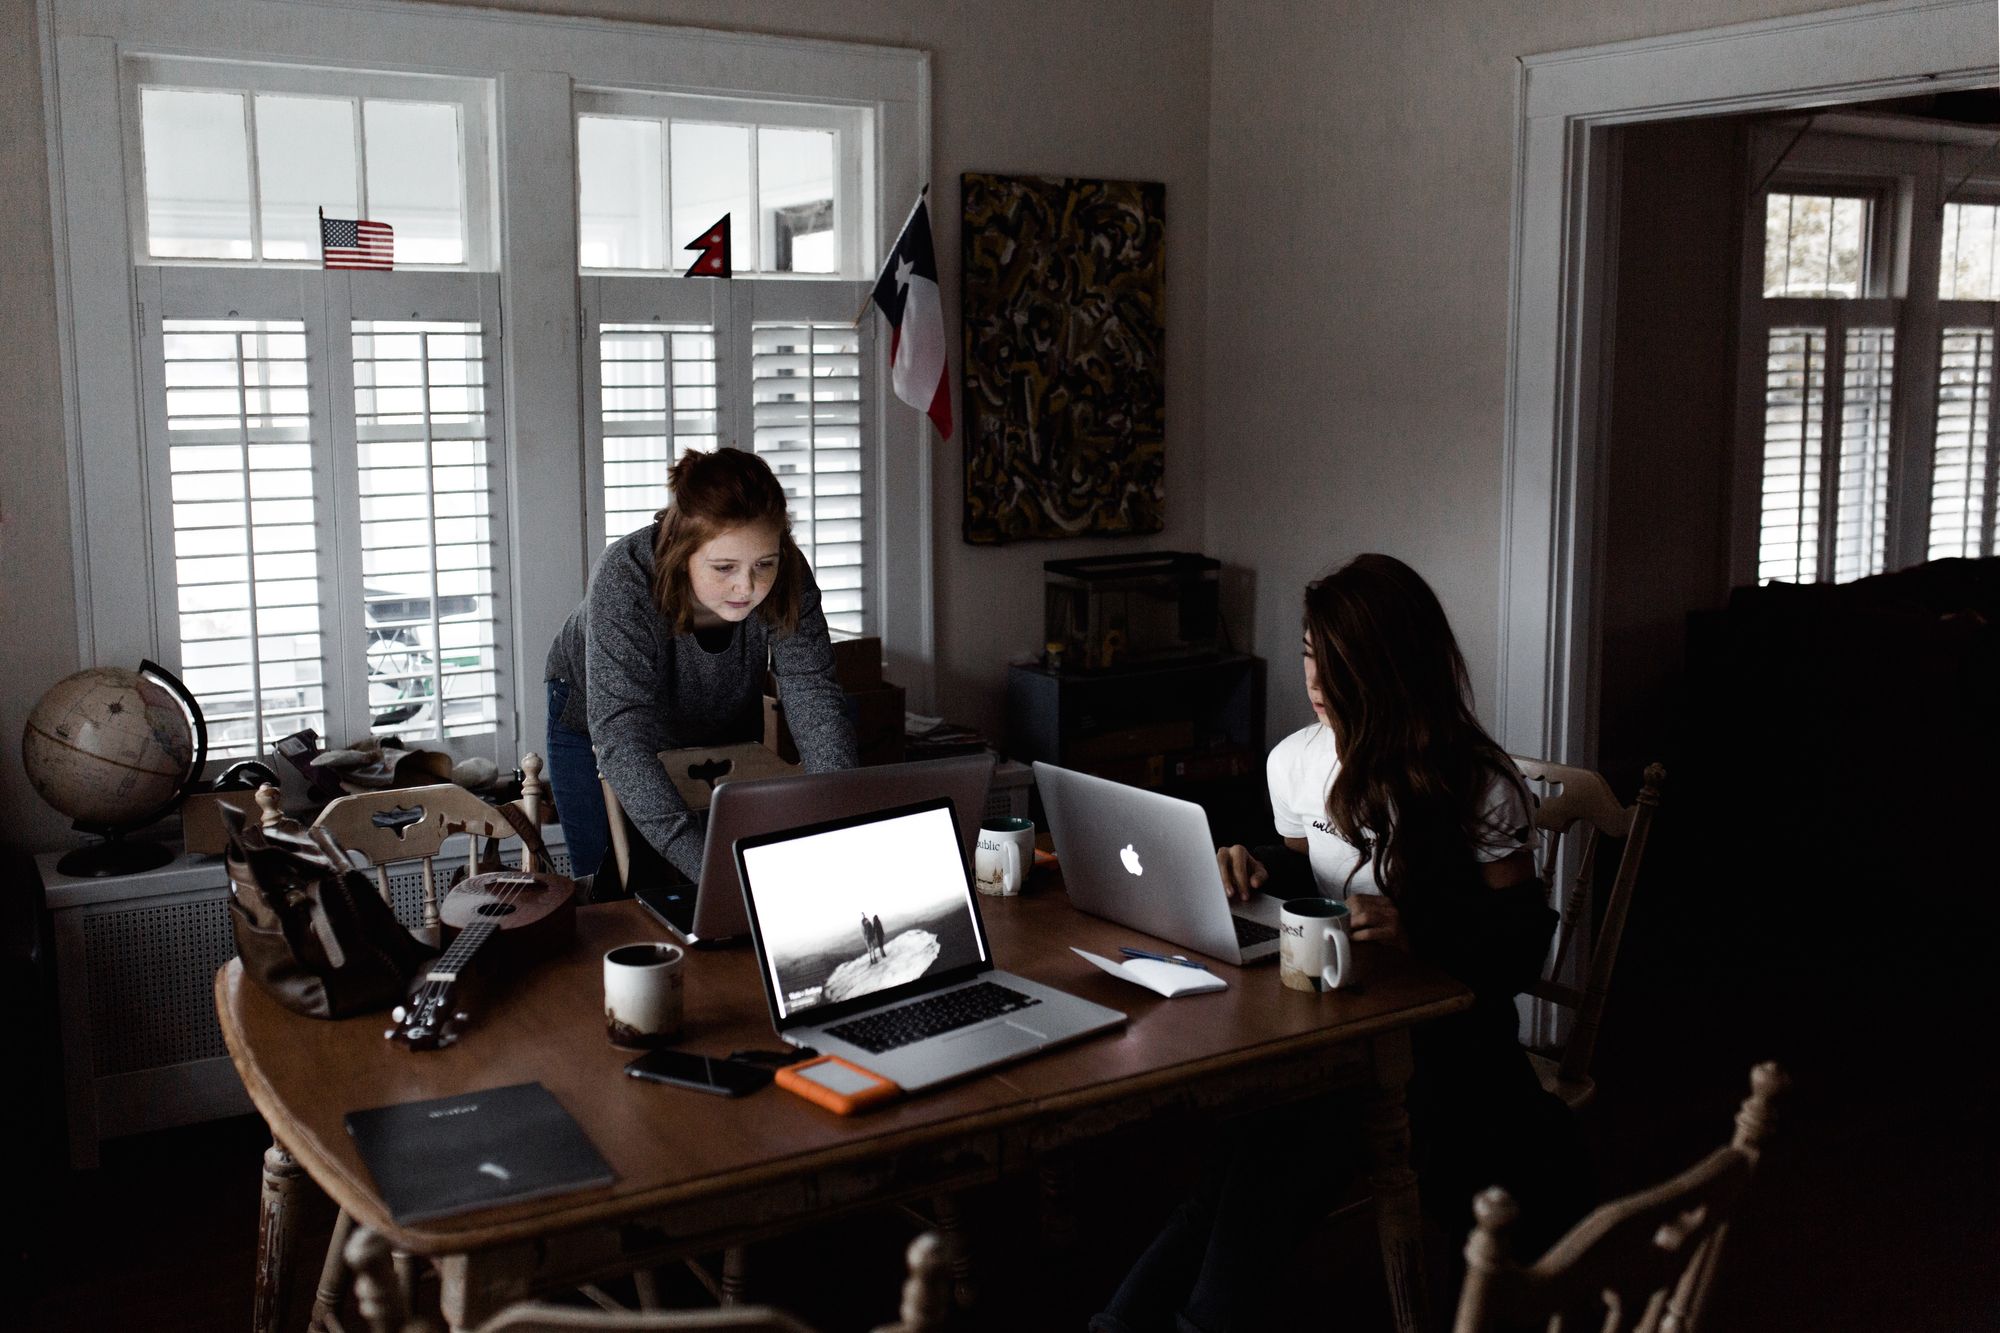 Two women working from home together